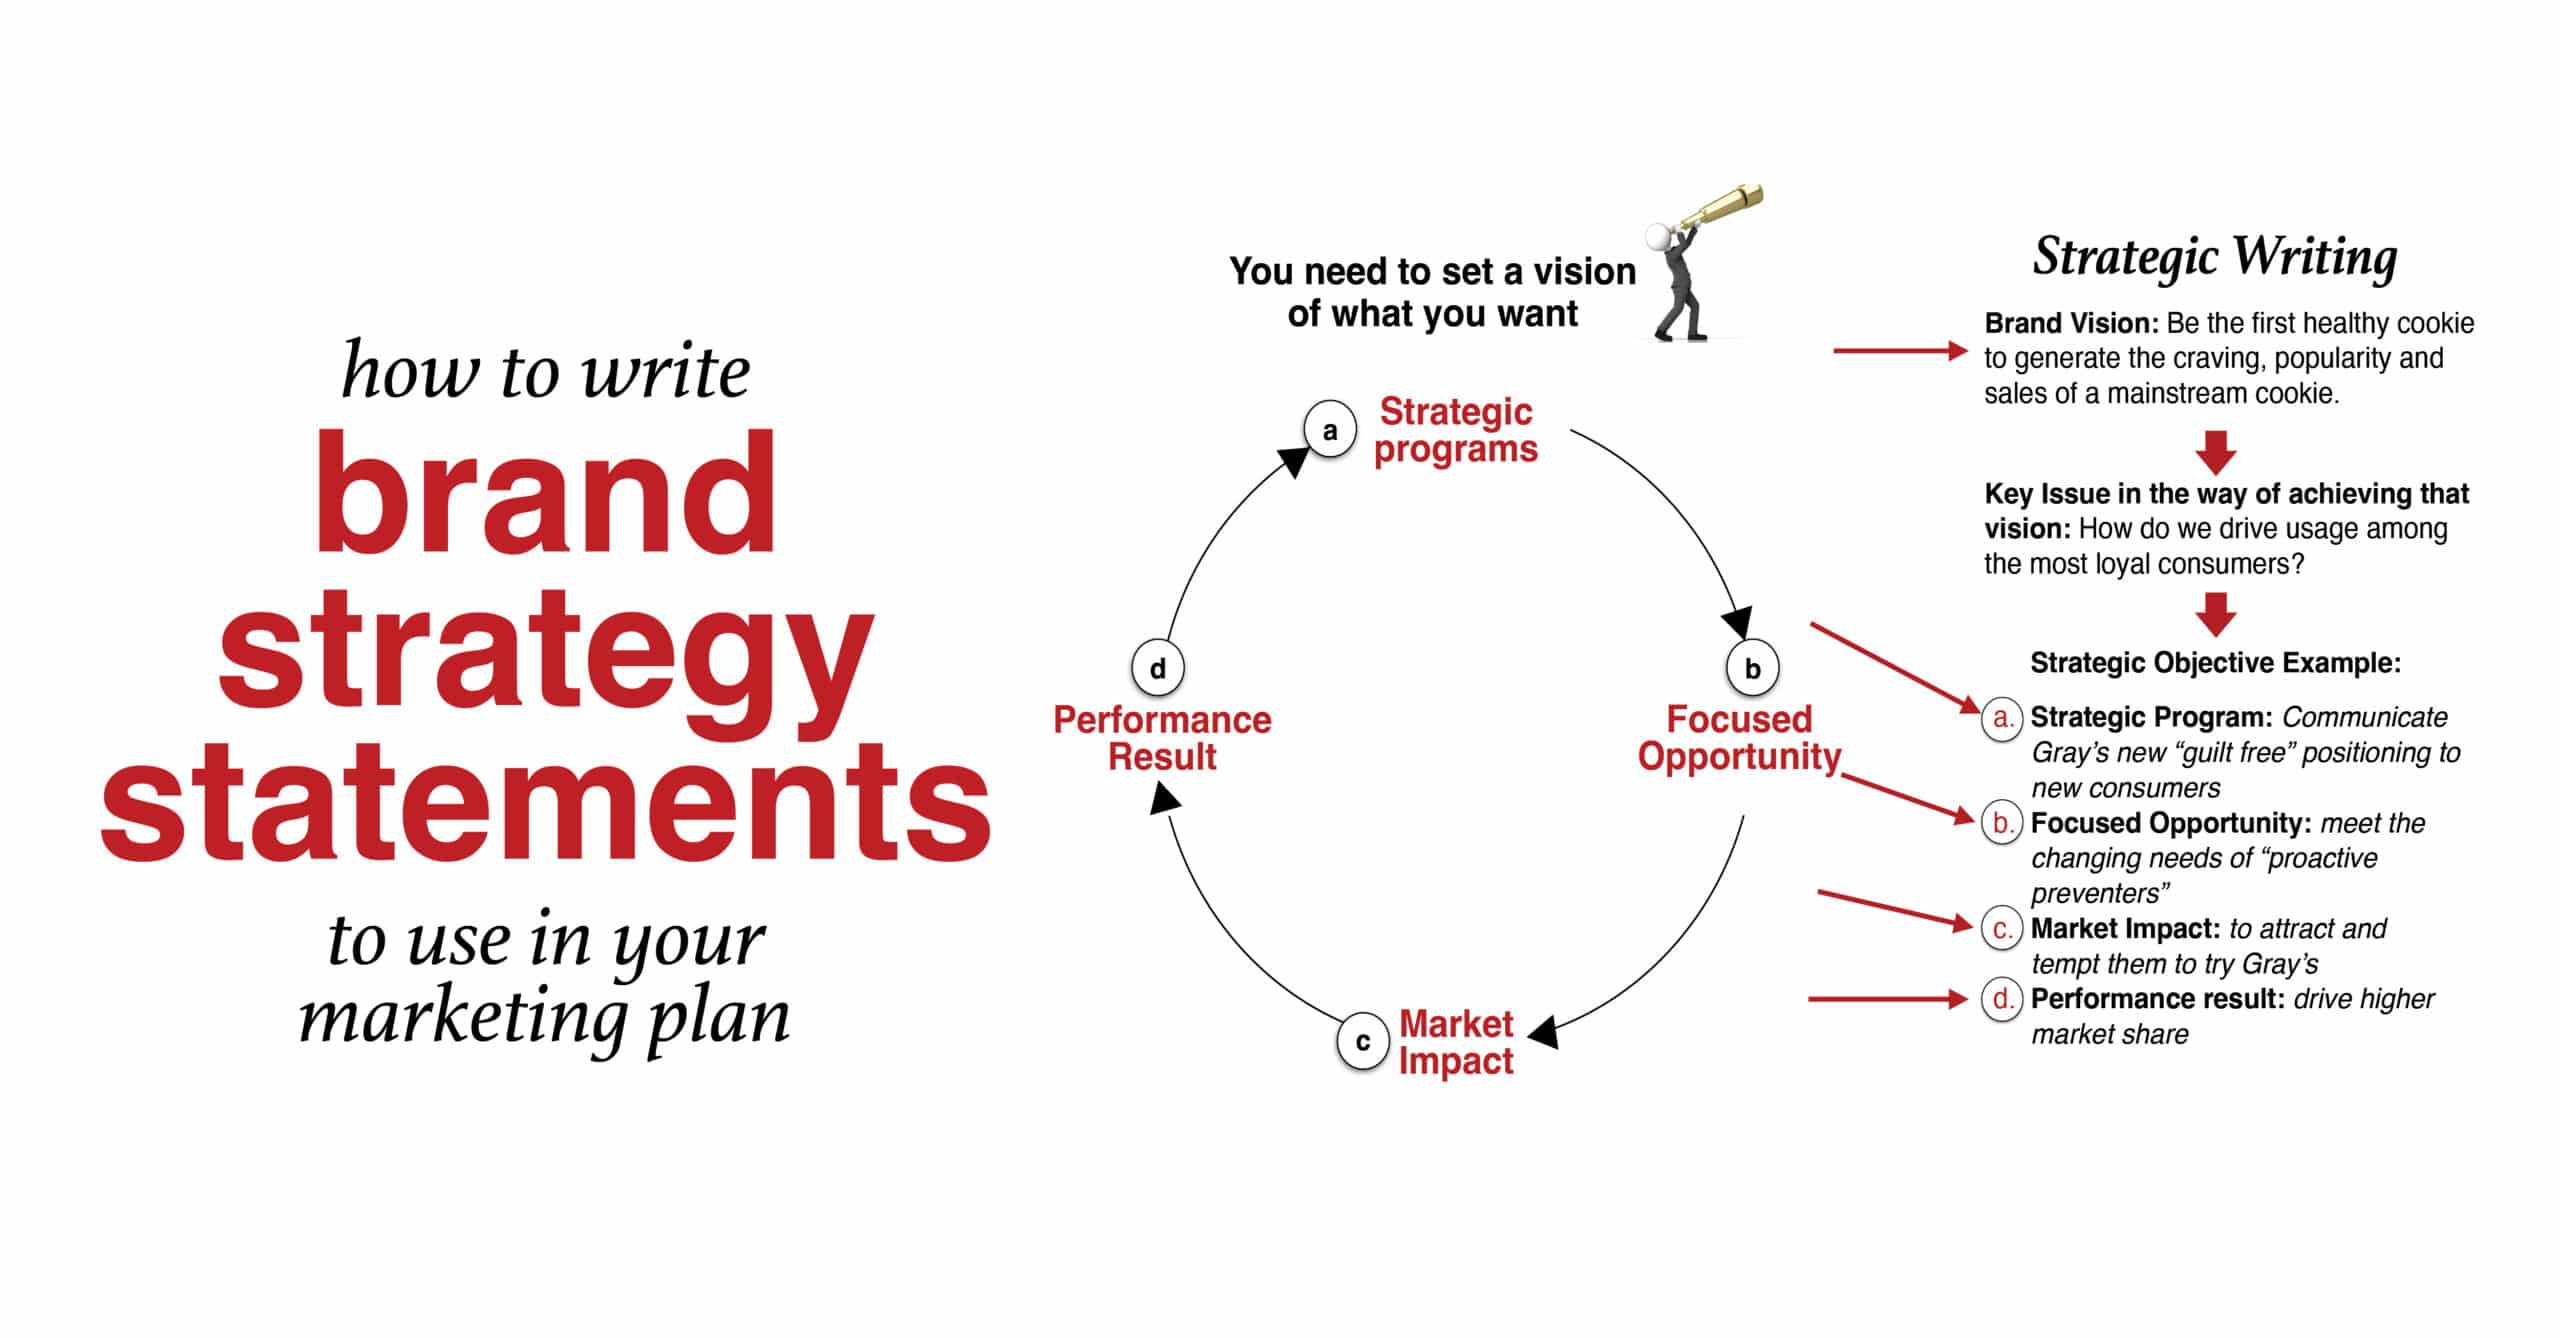 how to write brand strategy statements